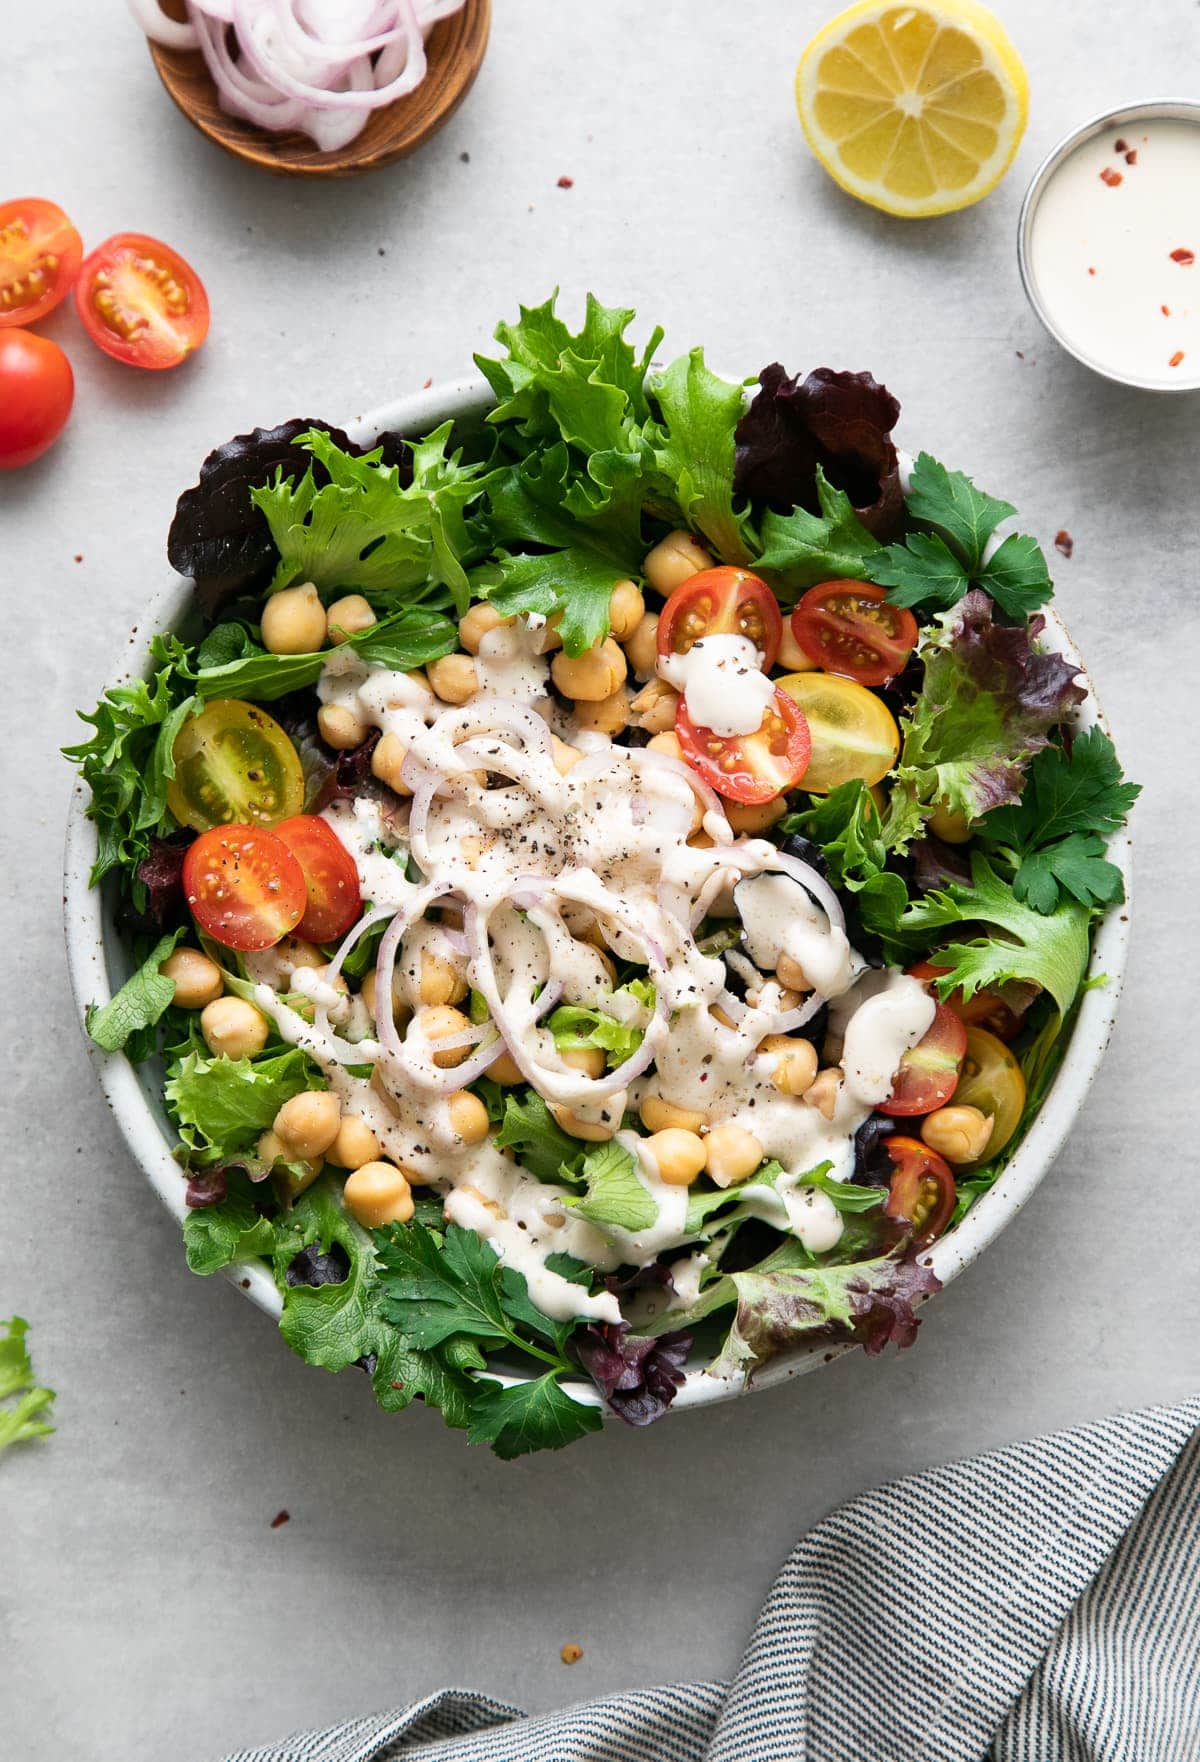 top down view of leafy green salad with chickpeas and dressed with lemony tahini dressing.